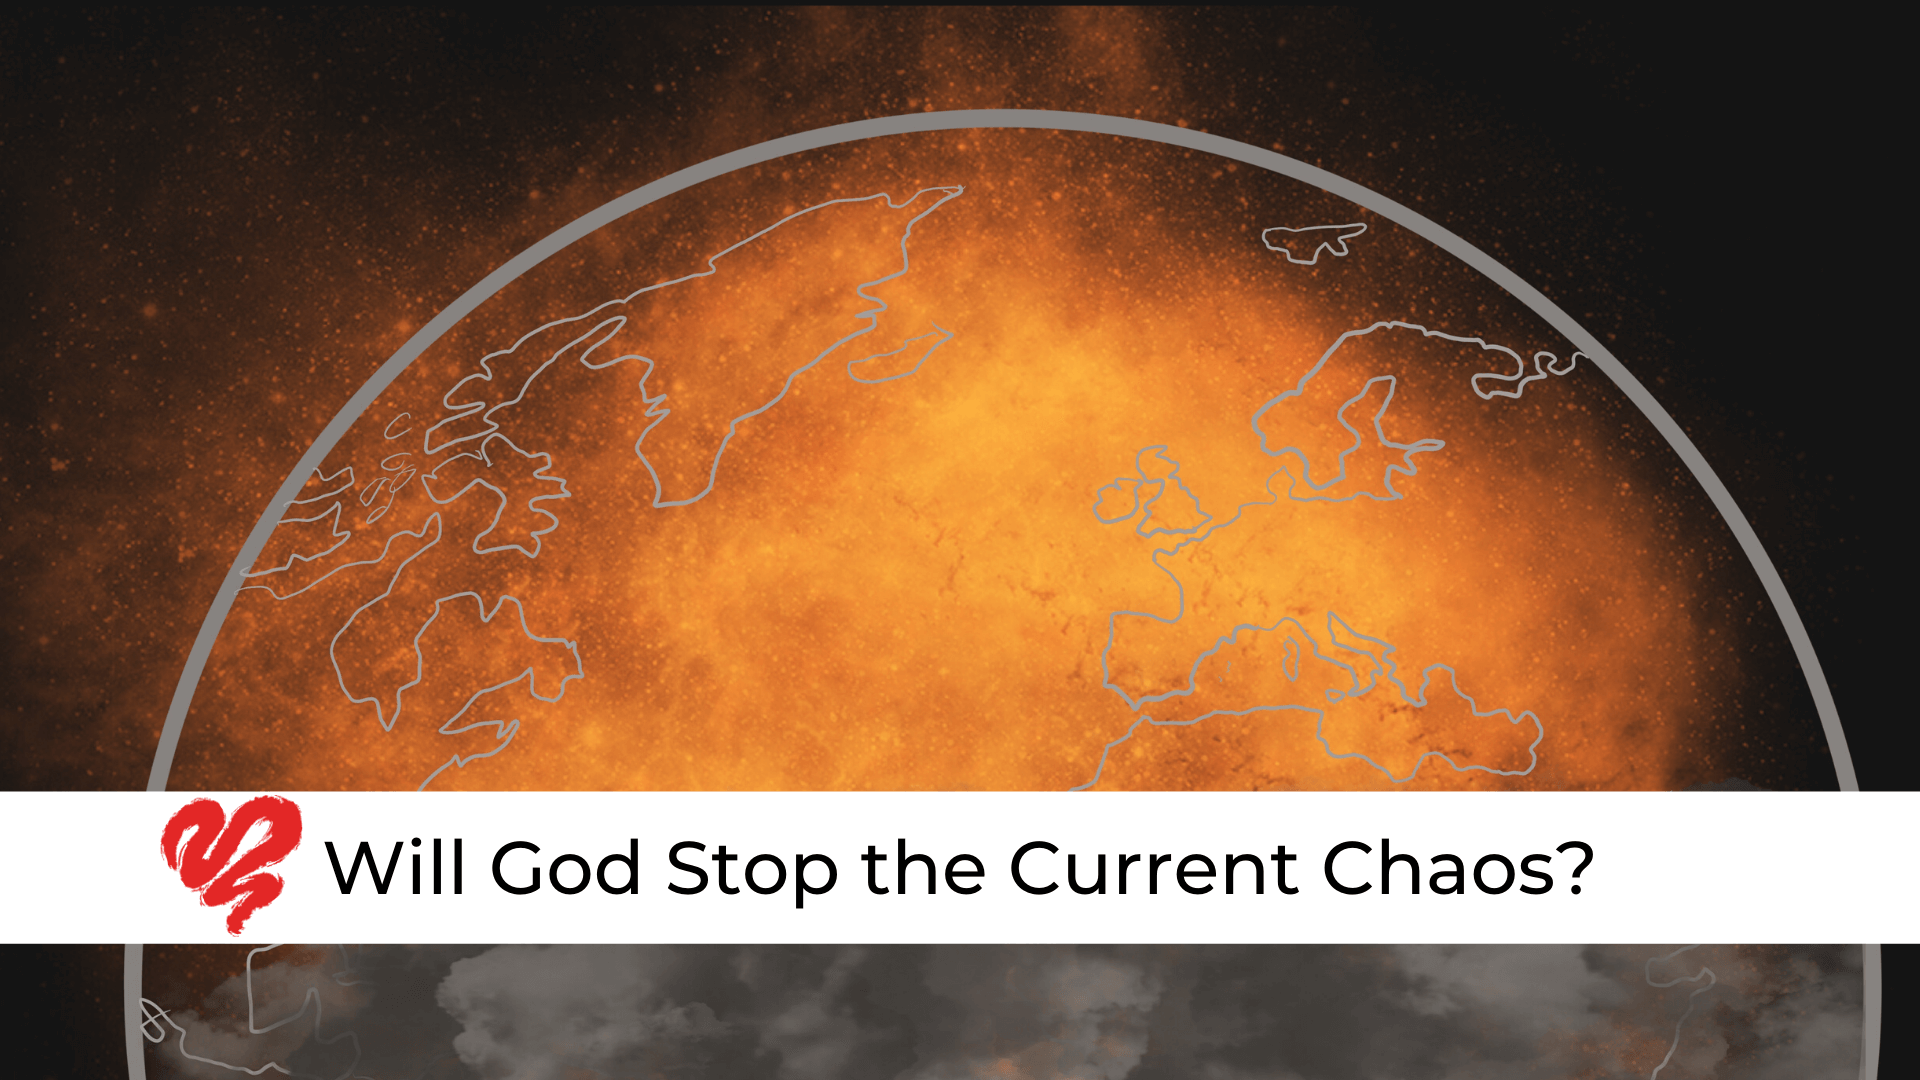 Will God stop the current chaos